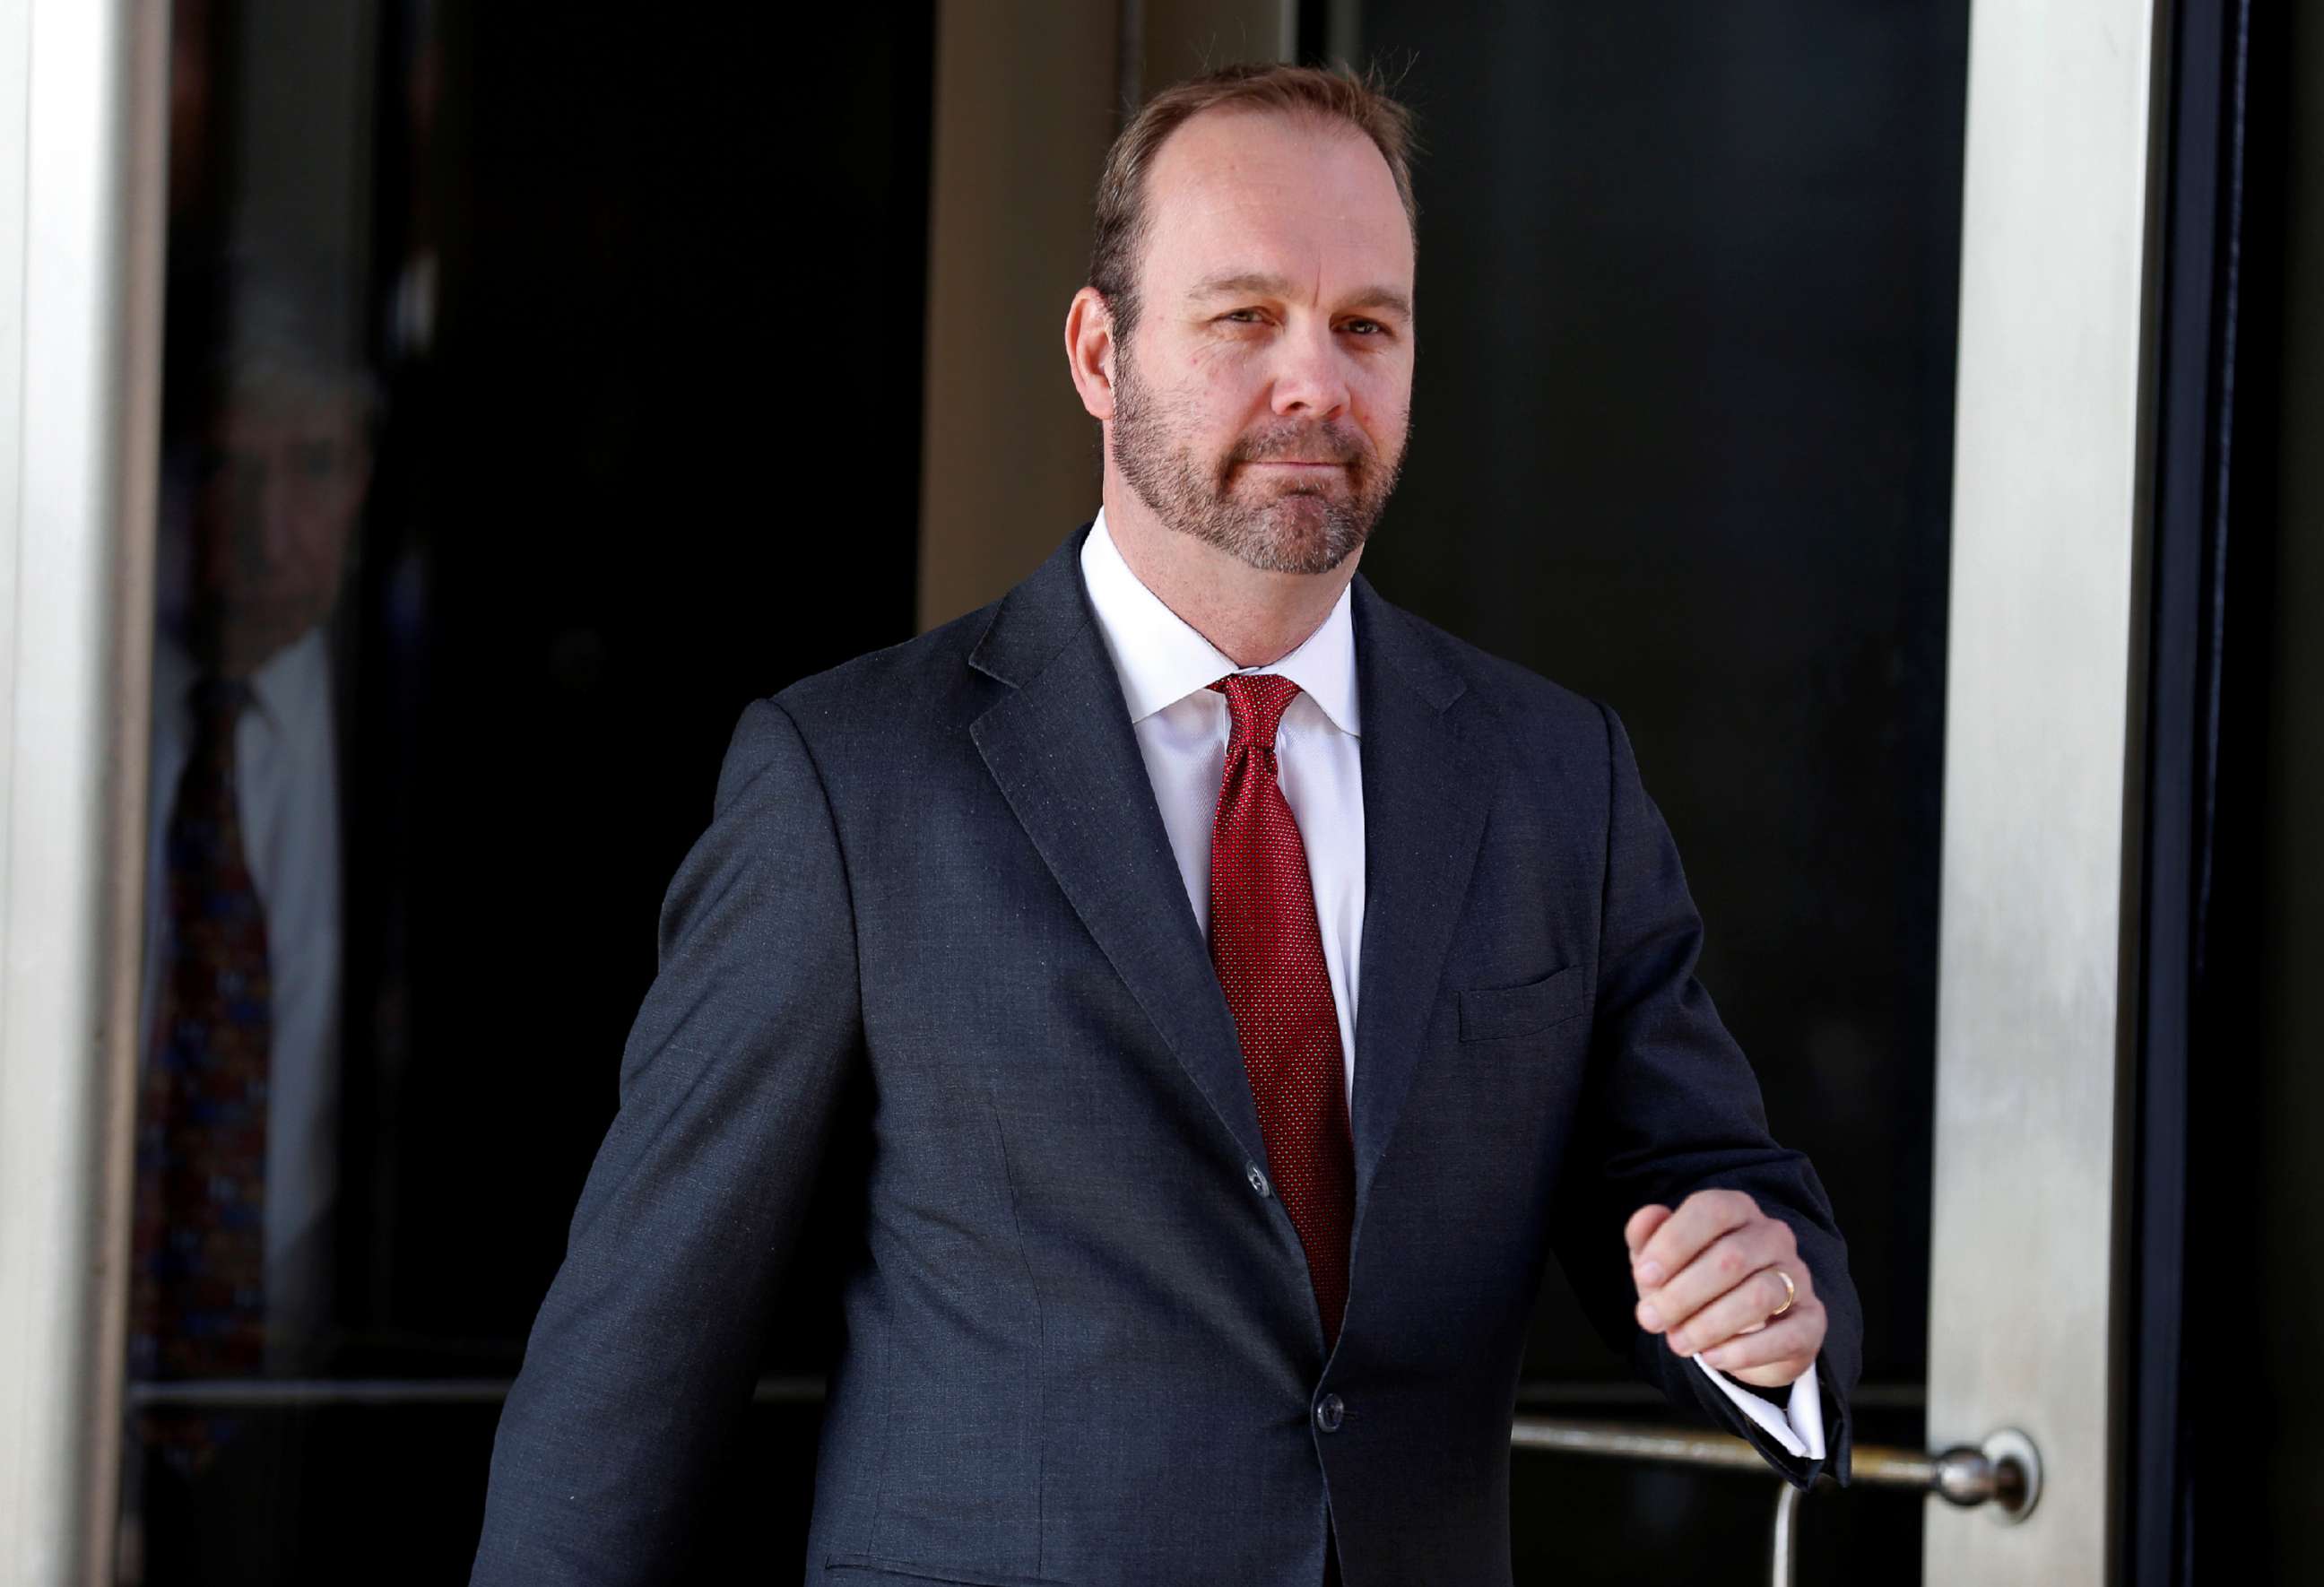 PHOTO: Former campaign aide to President Donald Trump, Rick Gates departs after a bond hearing at U.S. District Court in Washington, Dec. 11, 2017.